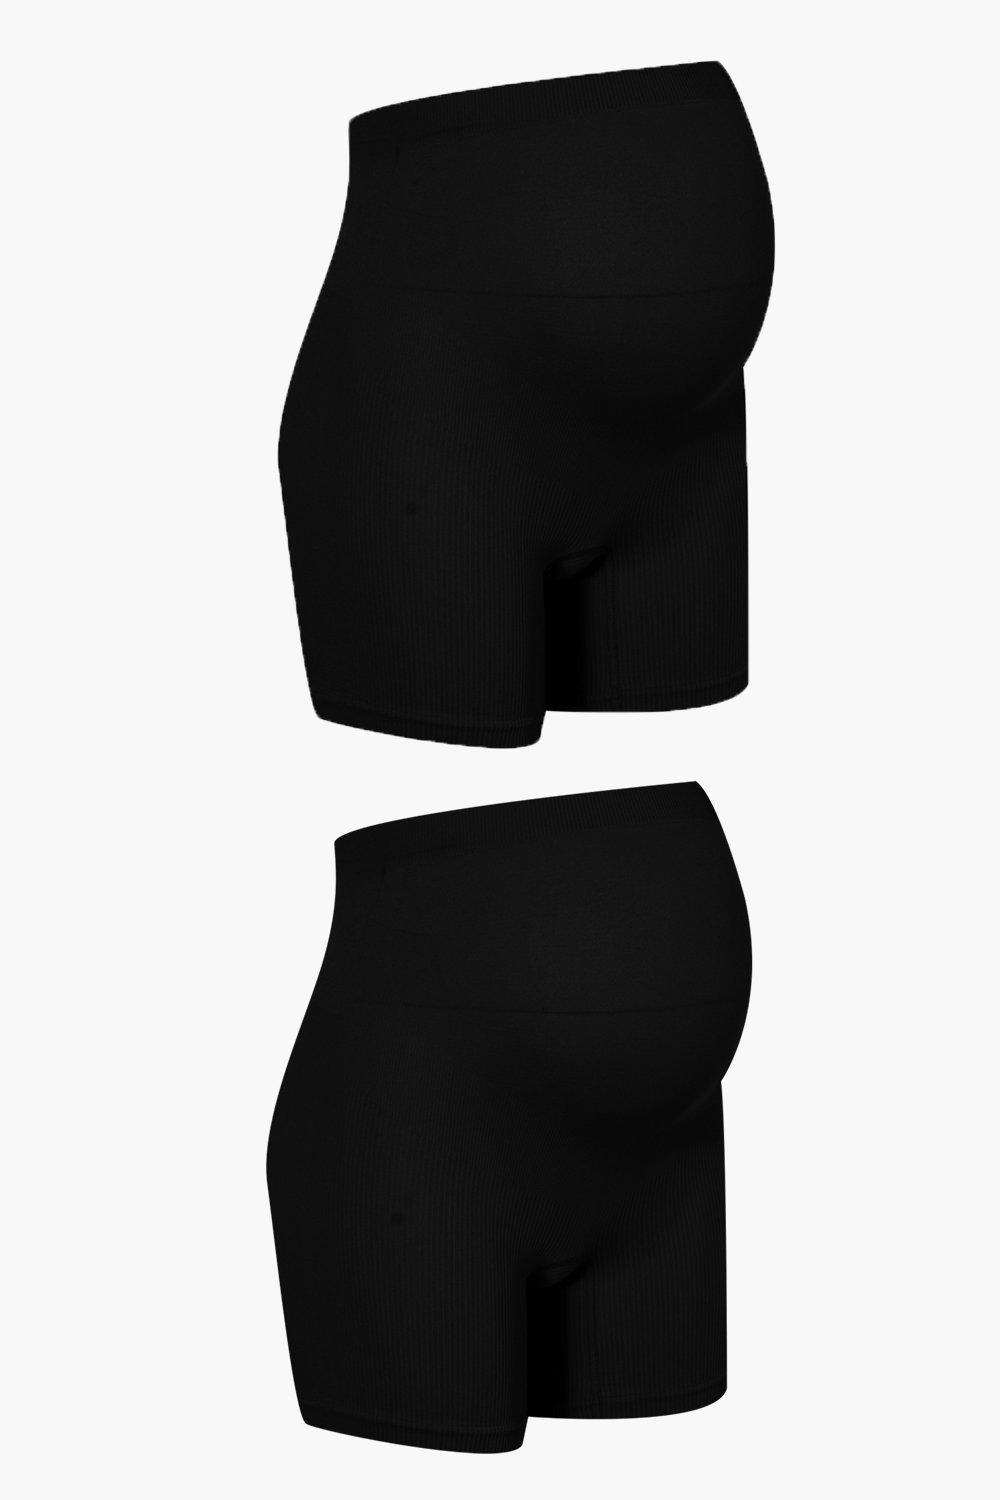 Buy SHAPERX Shorts Maternity Leggings Over The Belly Pregnancy Maternity  Pants with Extra Back Support (Black) (Size) 2XL at